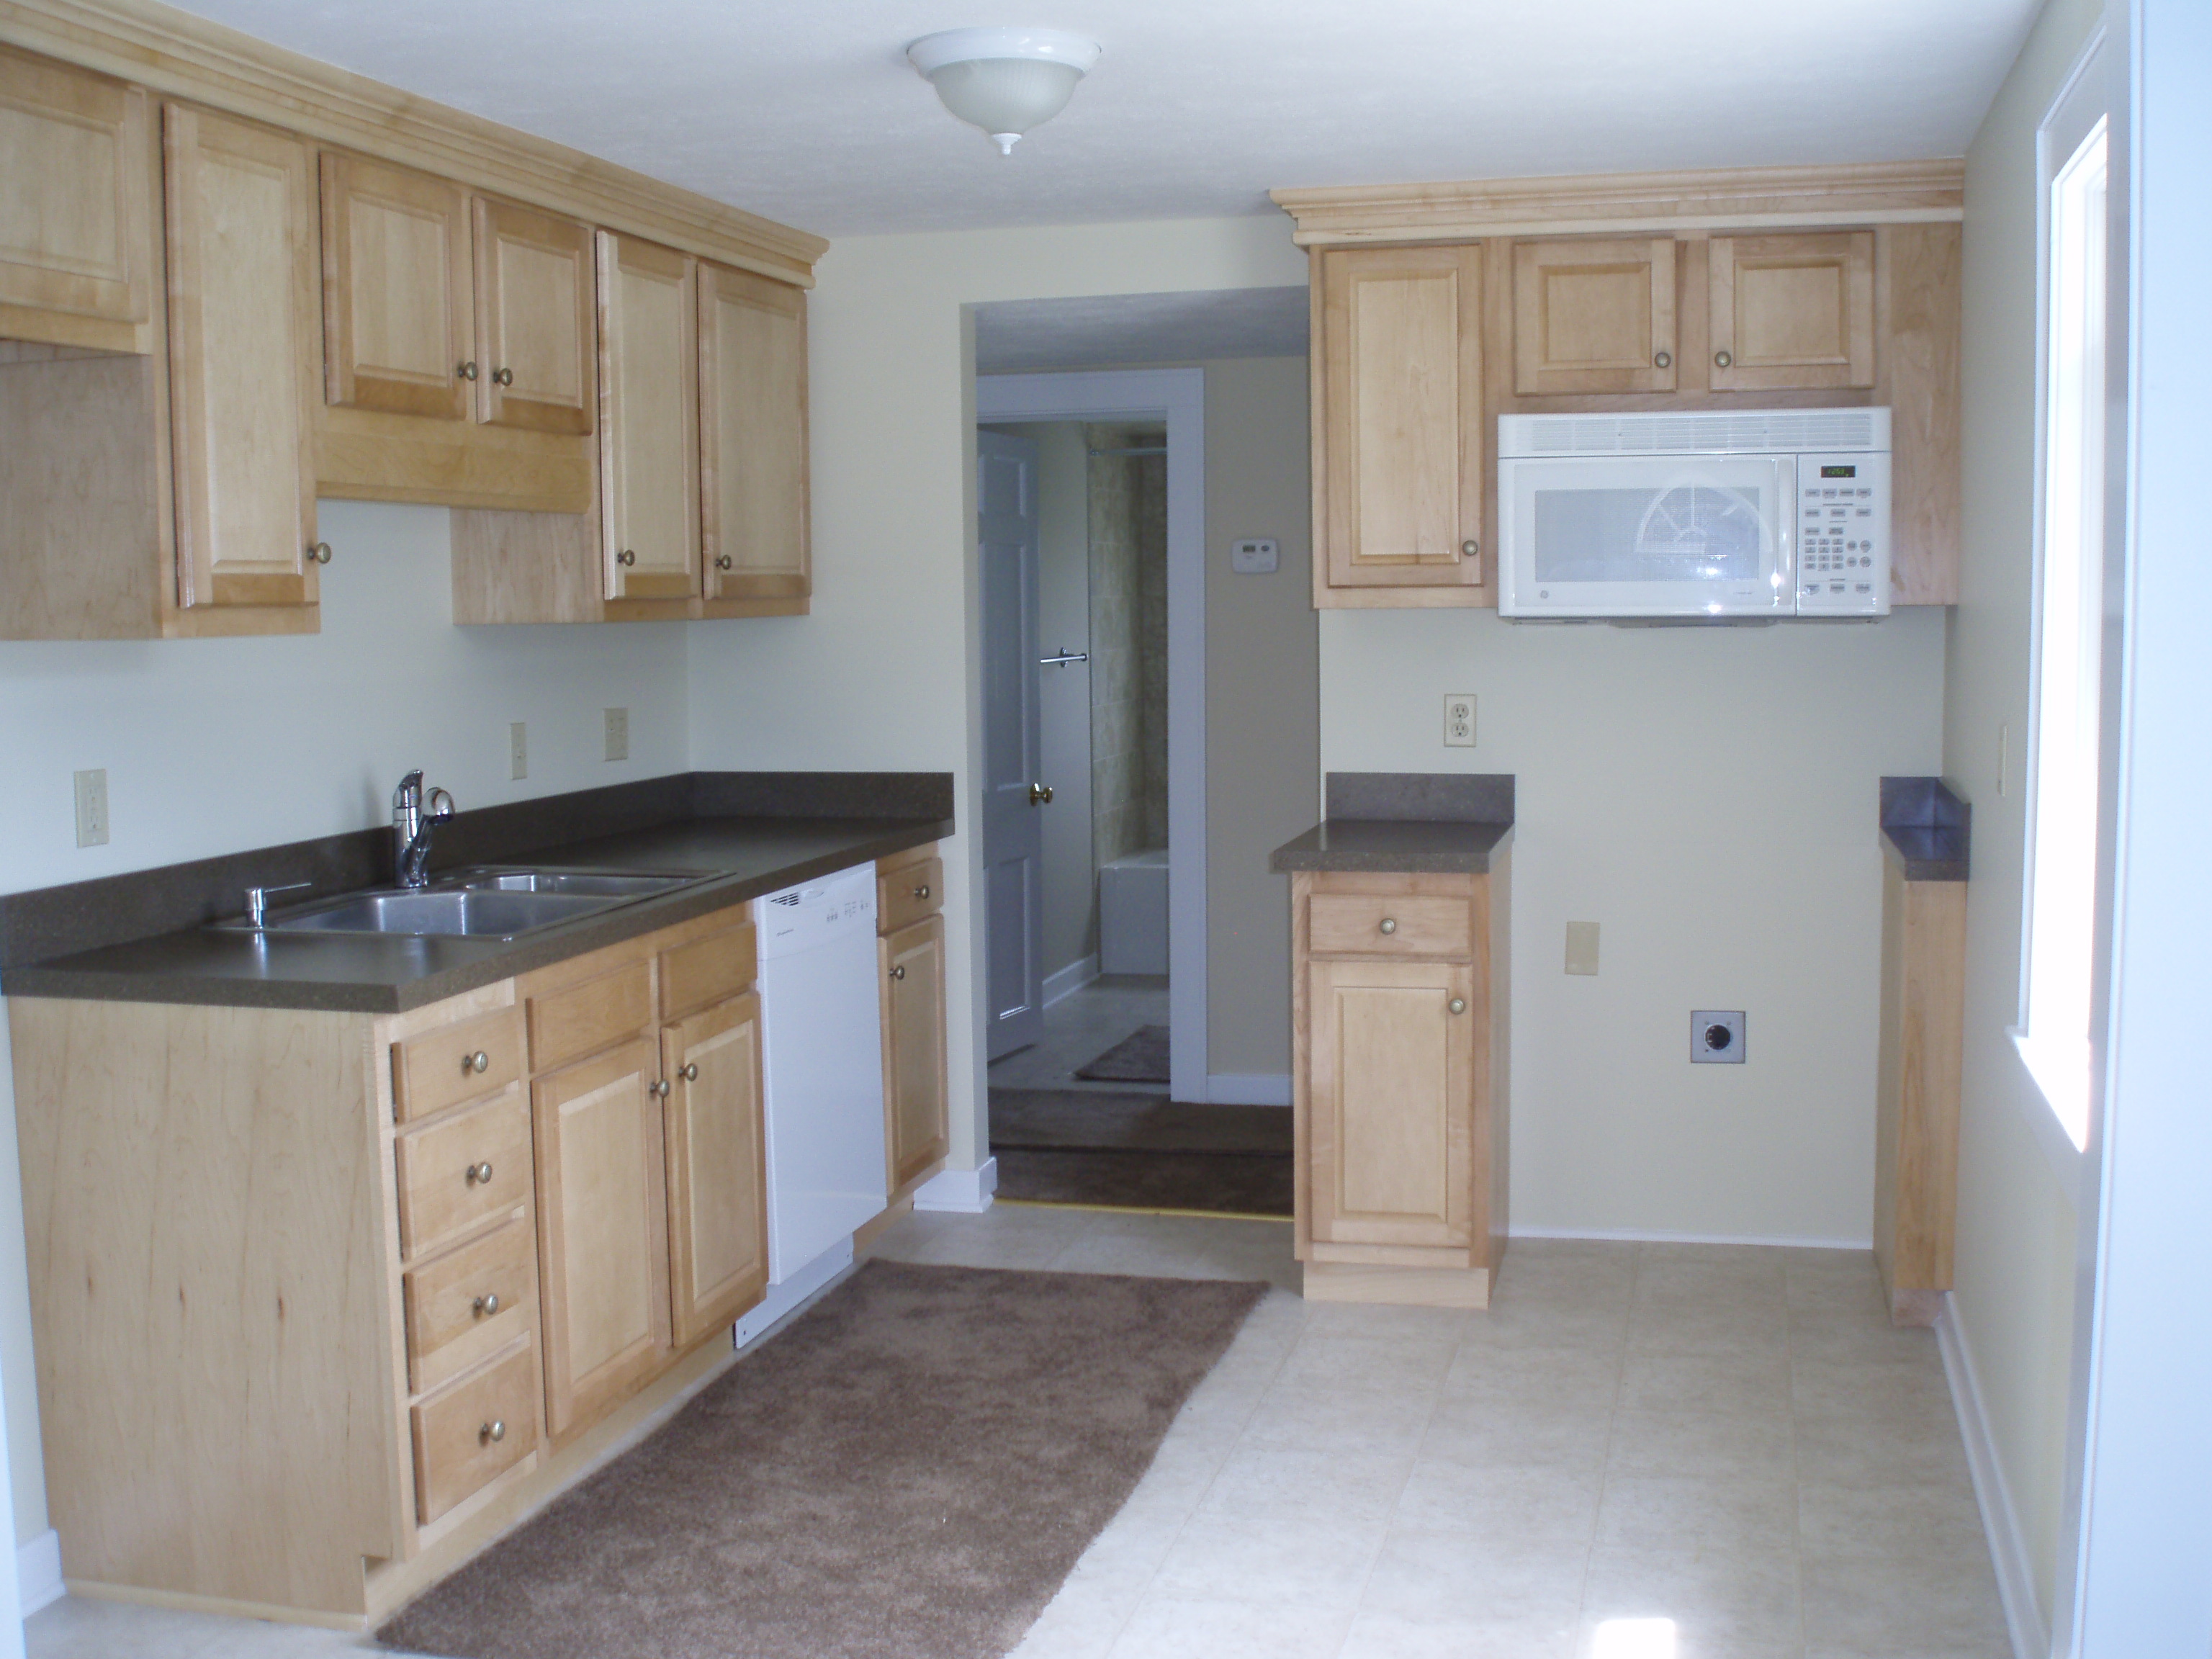 Complete Kitchen Remodel Using Kitchen Kompact Cabinets And